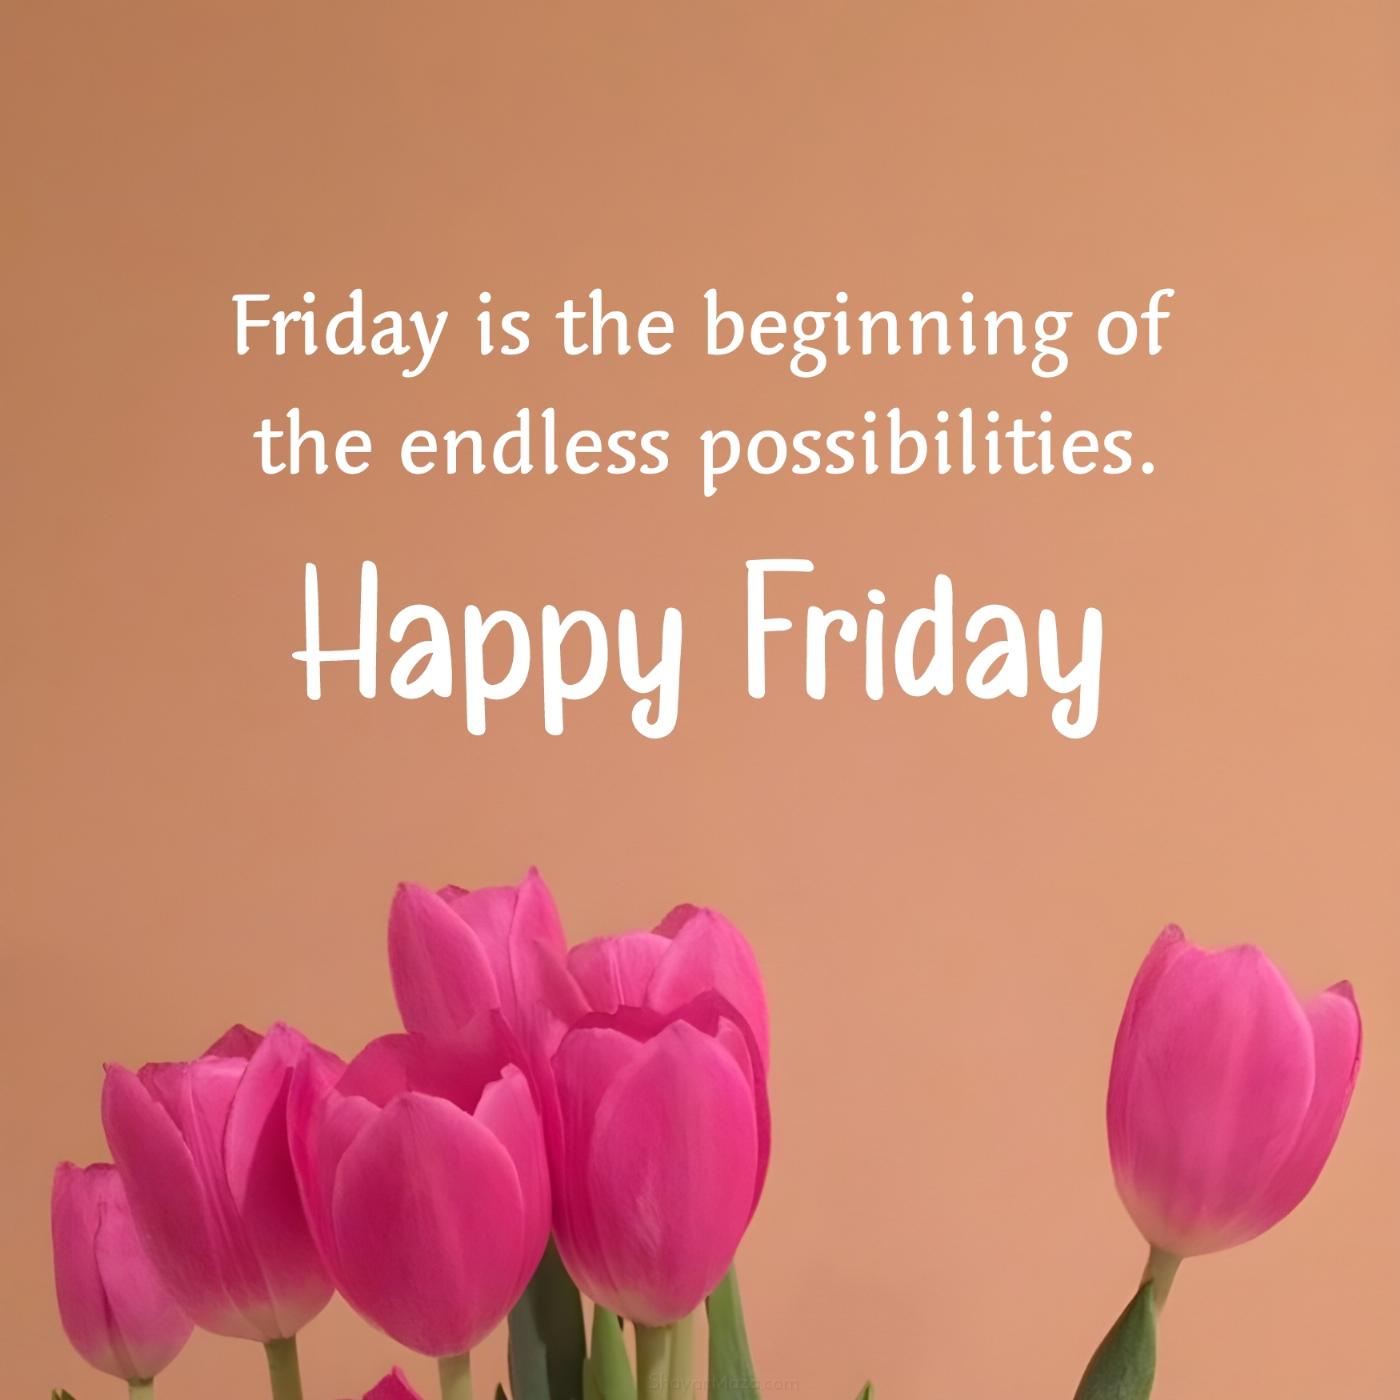 Friday is the beginning of the endless possibilities